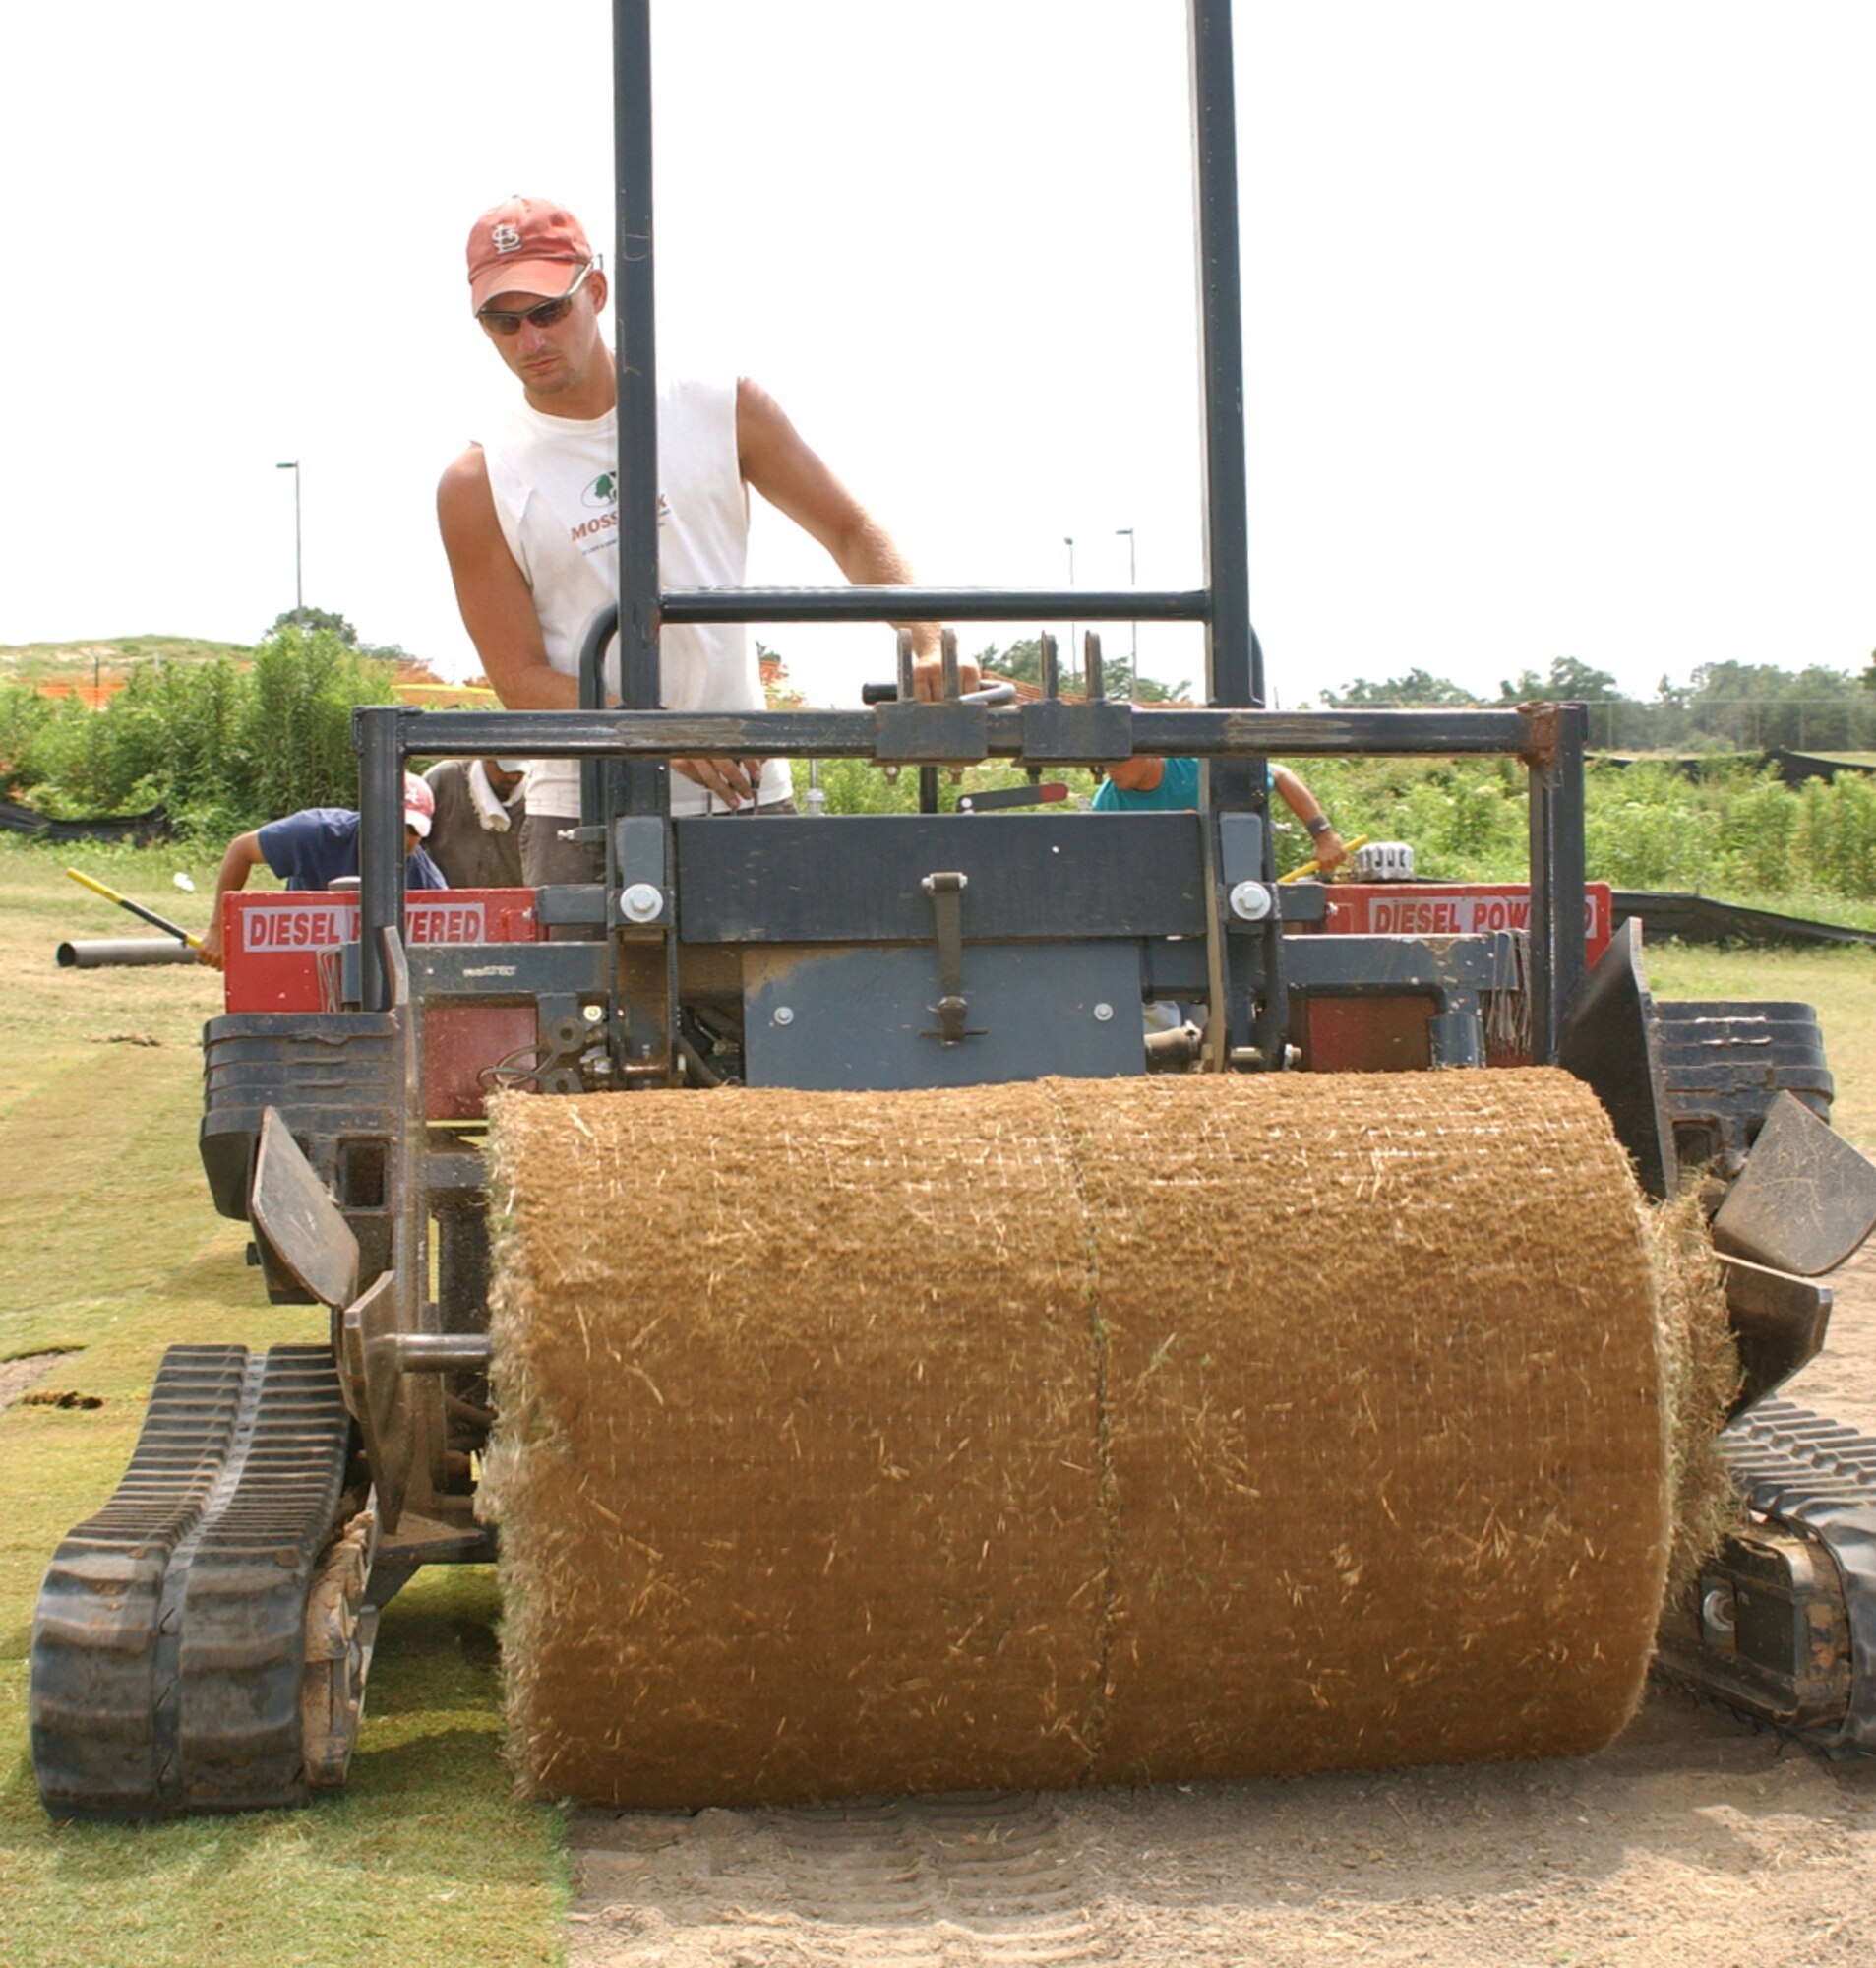 Equipment operator Brad Andrews from Southern Grass, West Point, rolls out sod on Hole 12 of Bay Breeze Golf Course June 6.  It’s part of a $4.5 million project that’s repairing damage from Hurricane Katrina and bringing the course up to U.S. Golf Association standards.  Bay Breeze is expected to reopen early this fall.  (U. S. Air Force photo by Kemberly Groue)